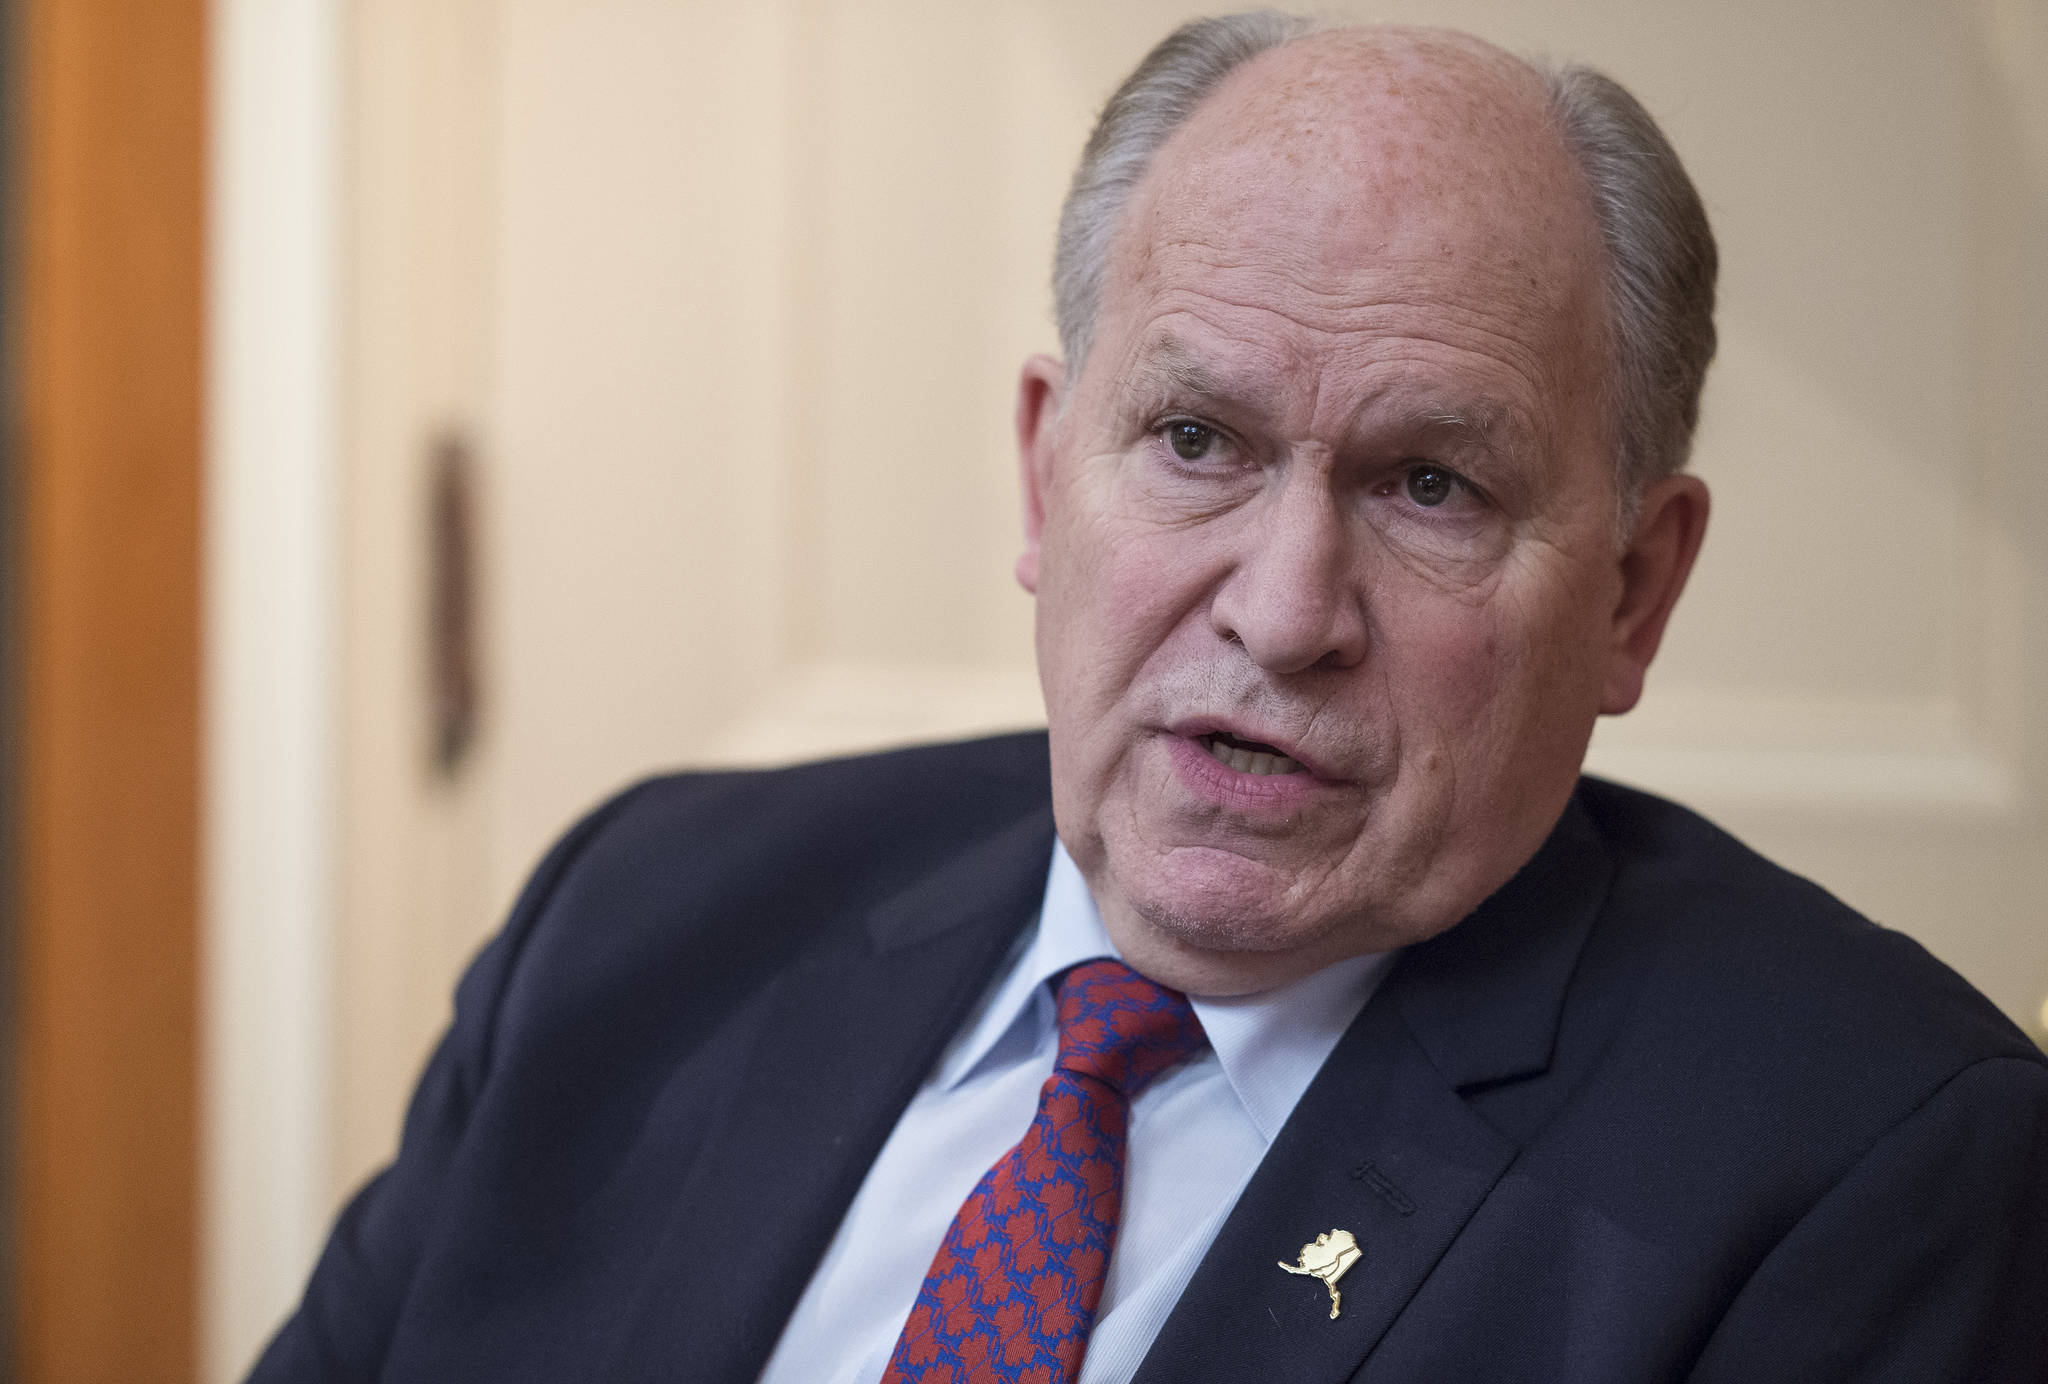 Gov. Bill Walker answers a range of questions during an interview with the Empire in his Capitol office on Friday, Jan. 5, 2018. (Michael Penn | Juneau Empire)